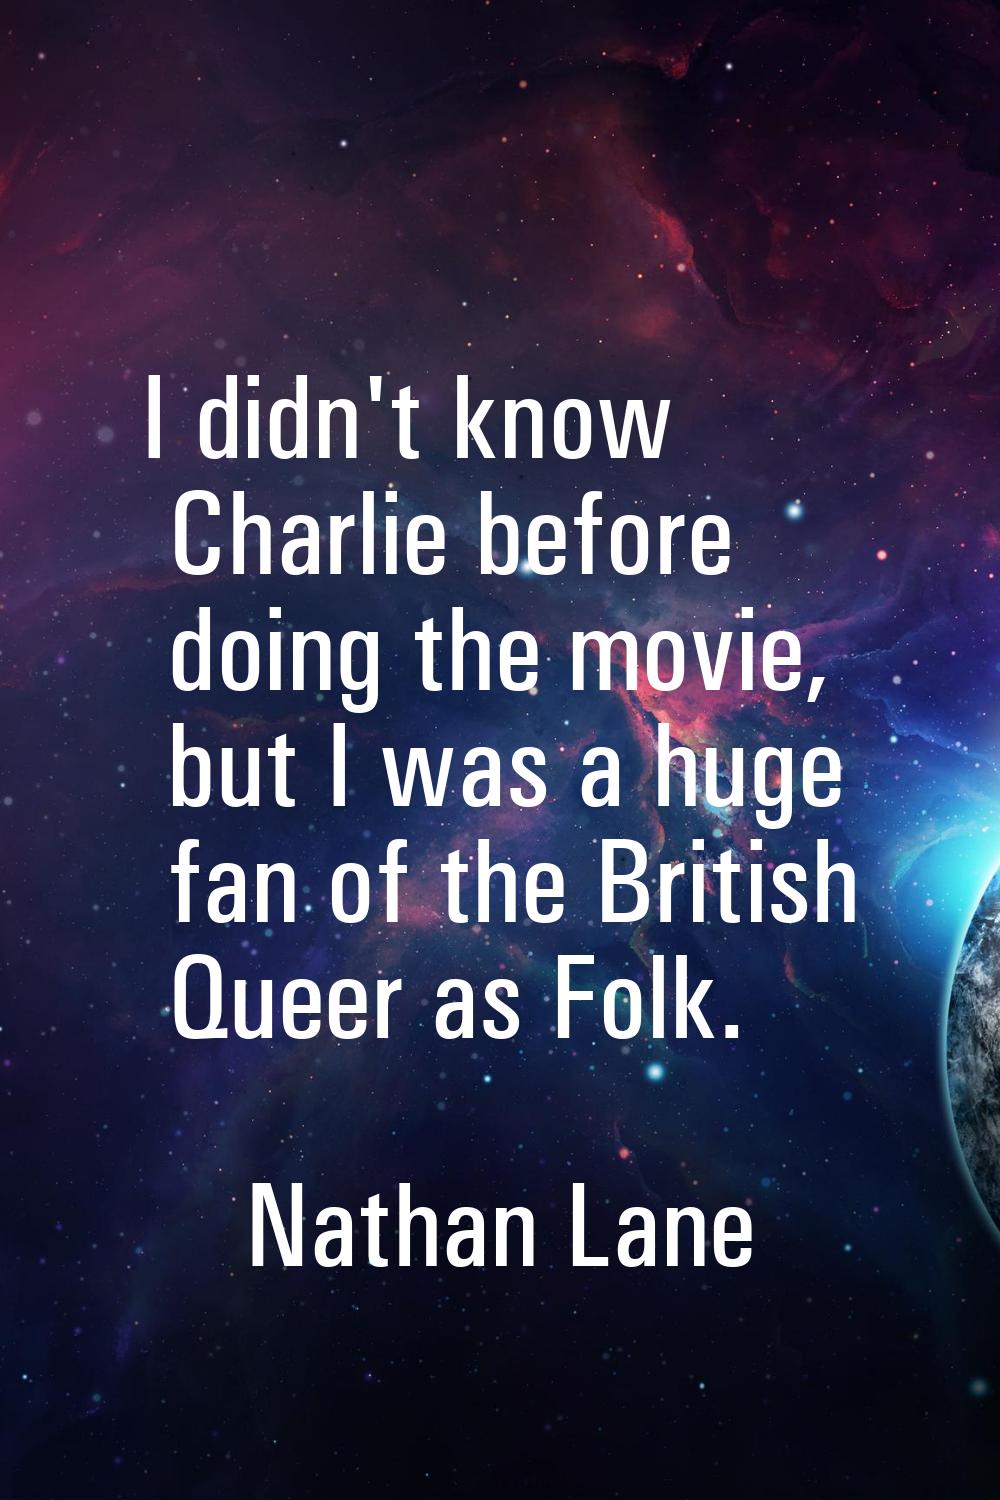 I didn't know Charlie before doing the movie, but I was a huge fan of the British Queer as Folk.